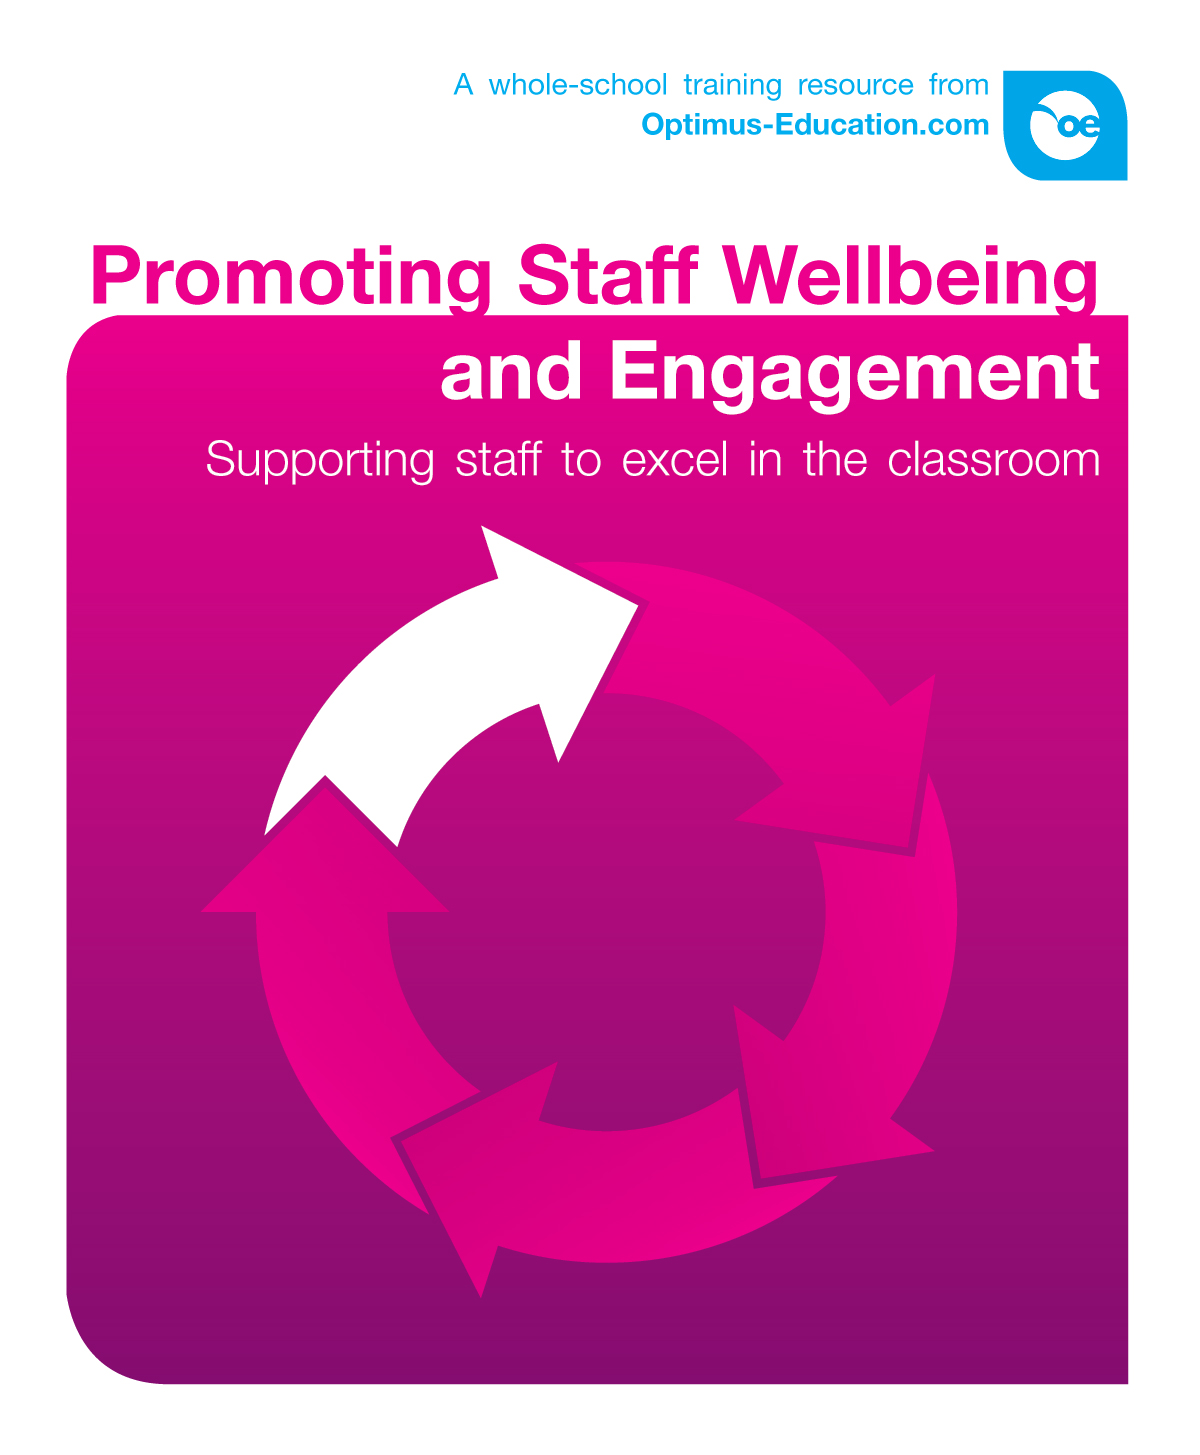 Promoting Staff Wellbeing and Engagement: Supporting staff to excel in the classroom